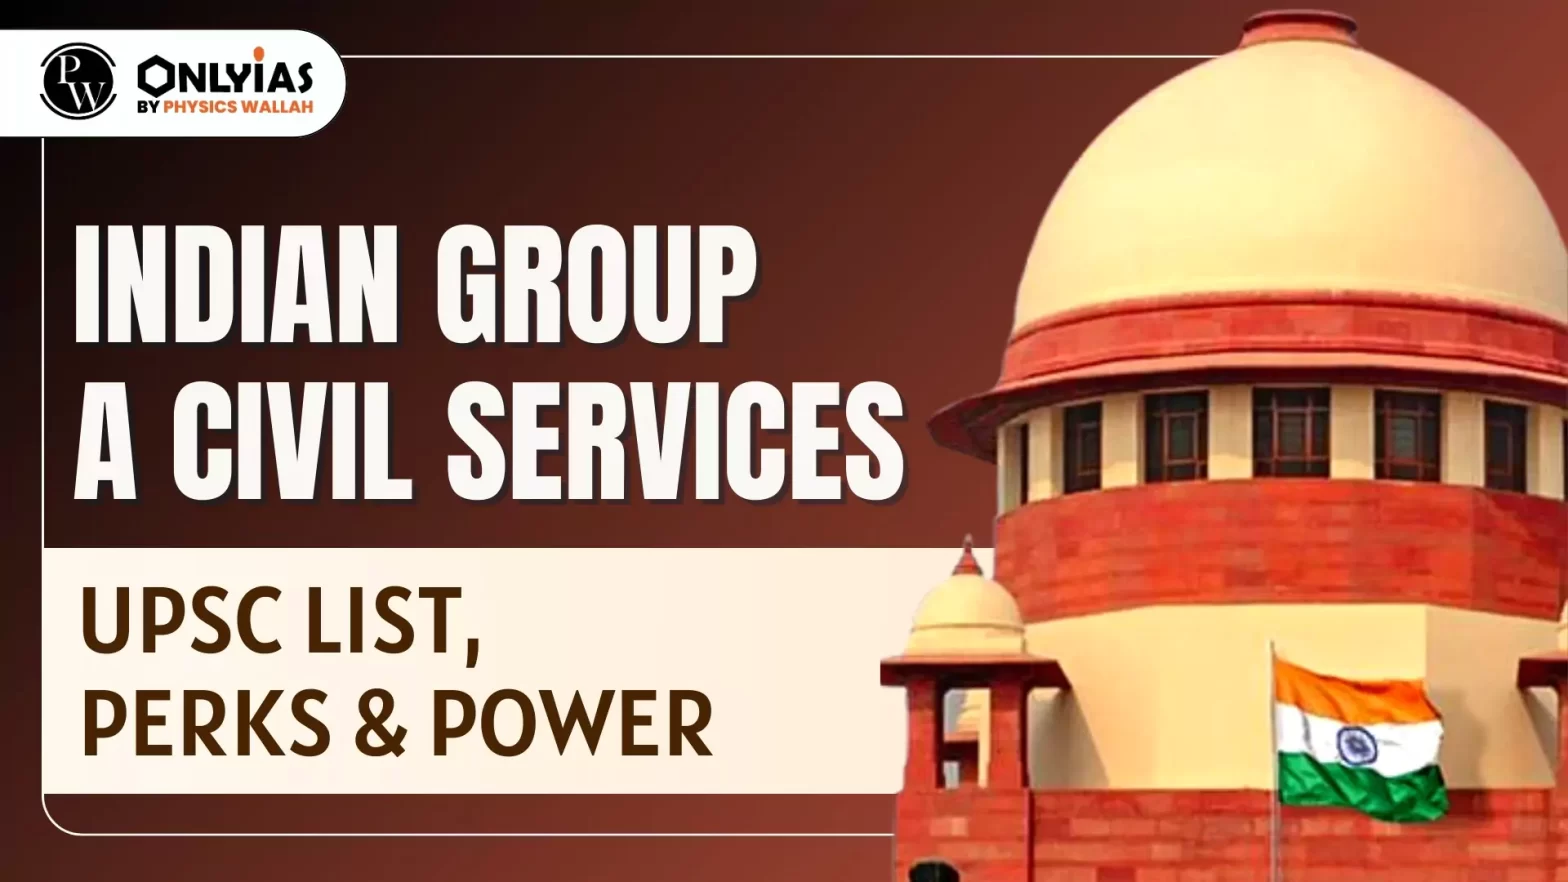 Indian Group A Civil Services: UPSC List, Perks & Power